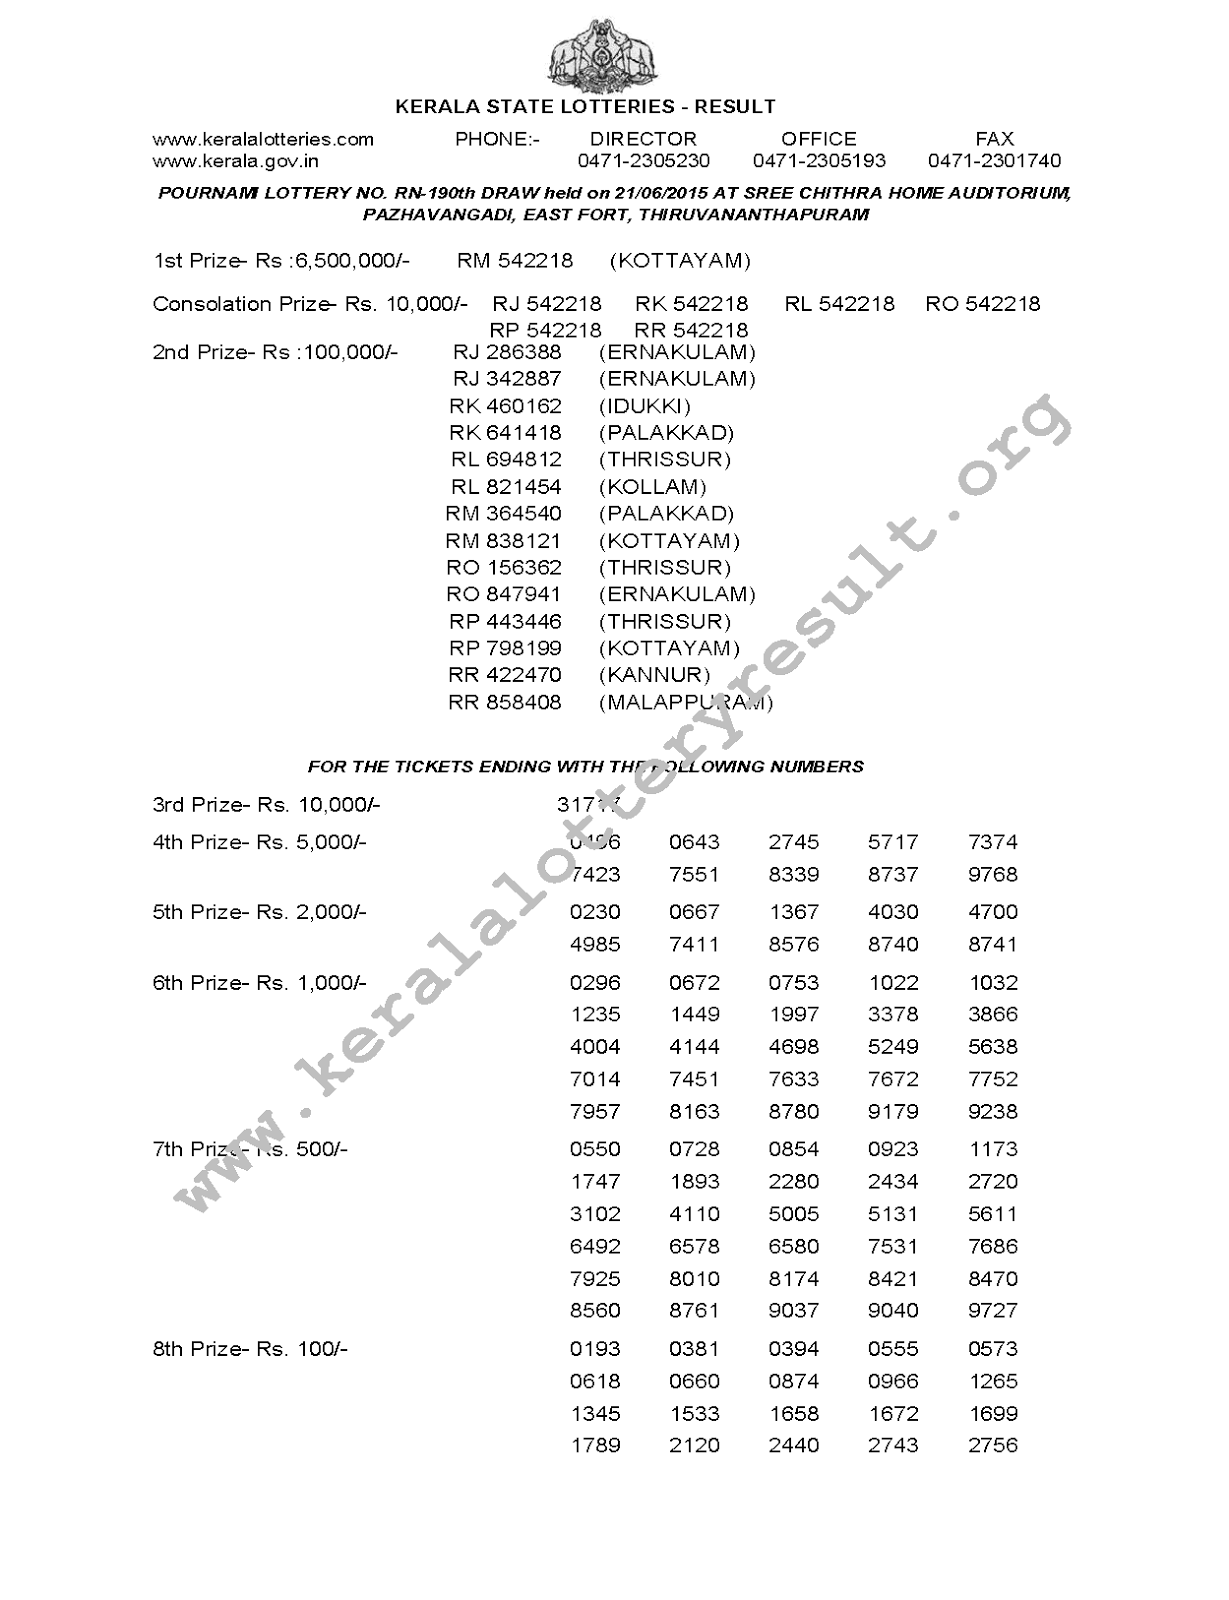 POURNAMI Lottery RN 190 Result 21-6-2015